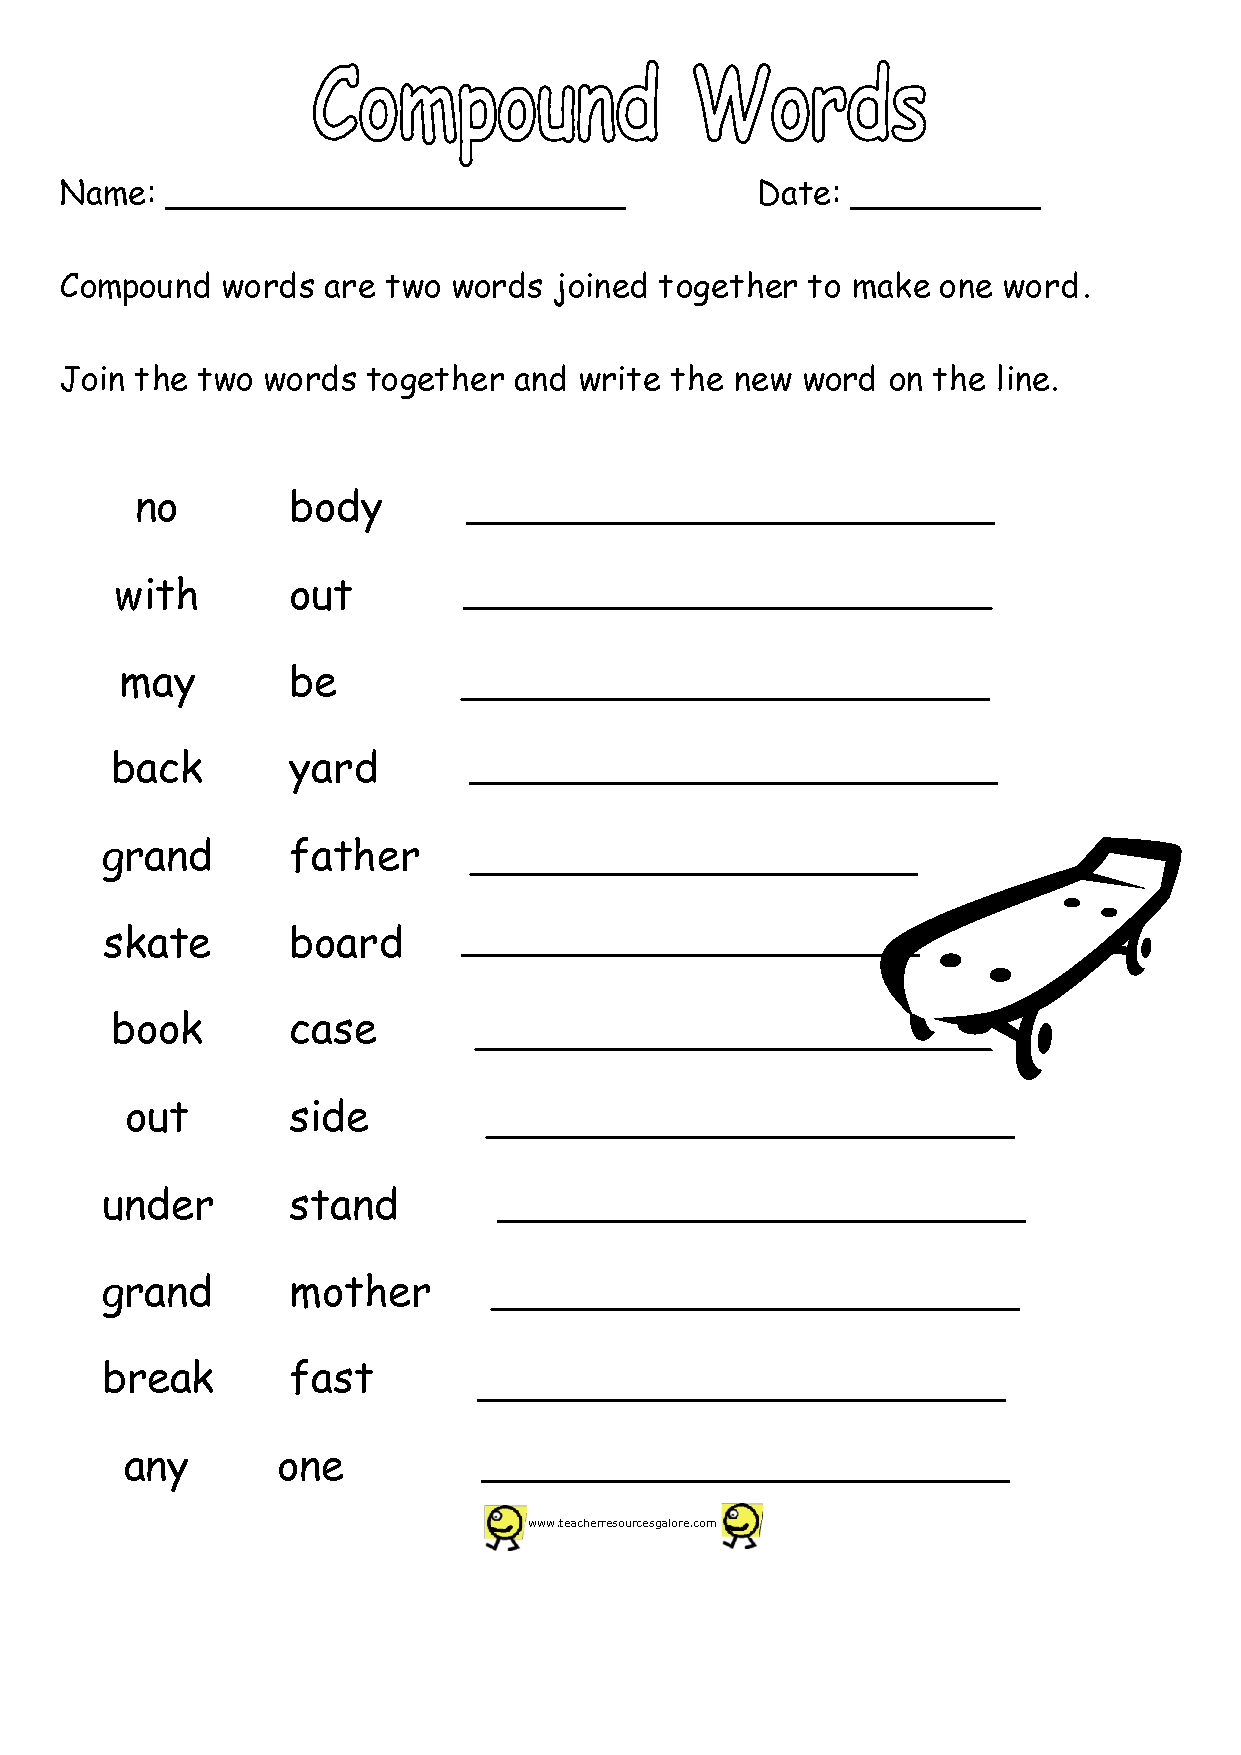 12-best-images-of-new-vocabulary-word-worksheet-2nd-grade-compound-words-worksheets-blank